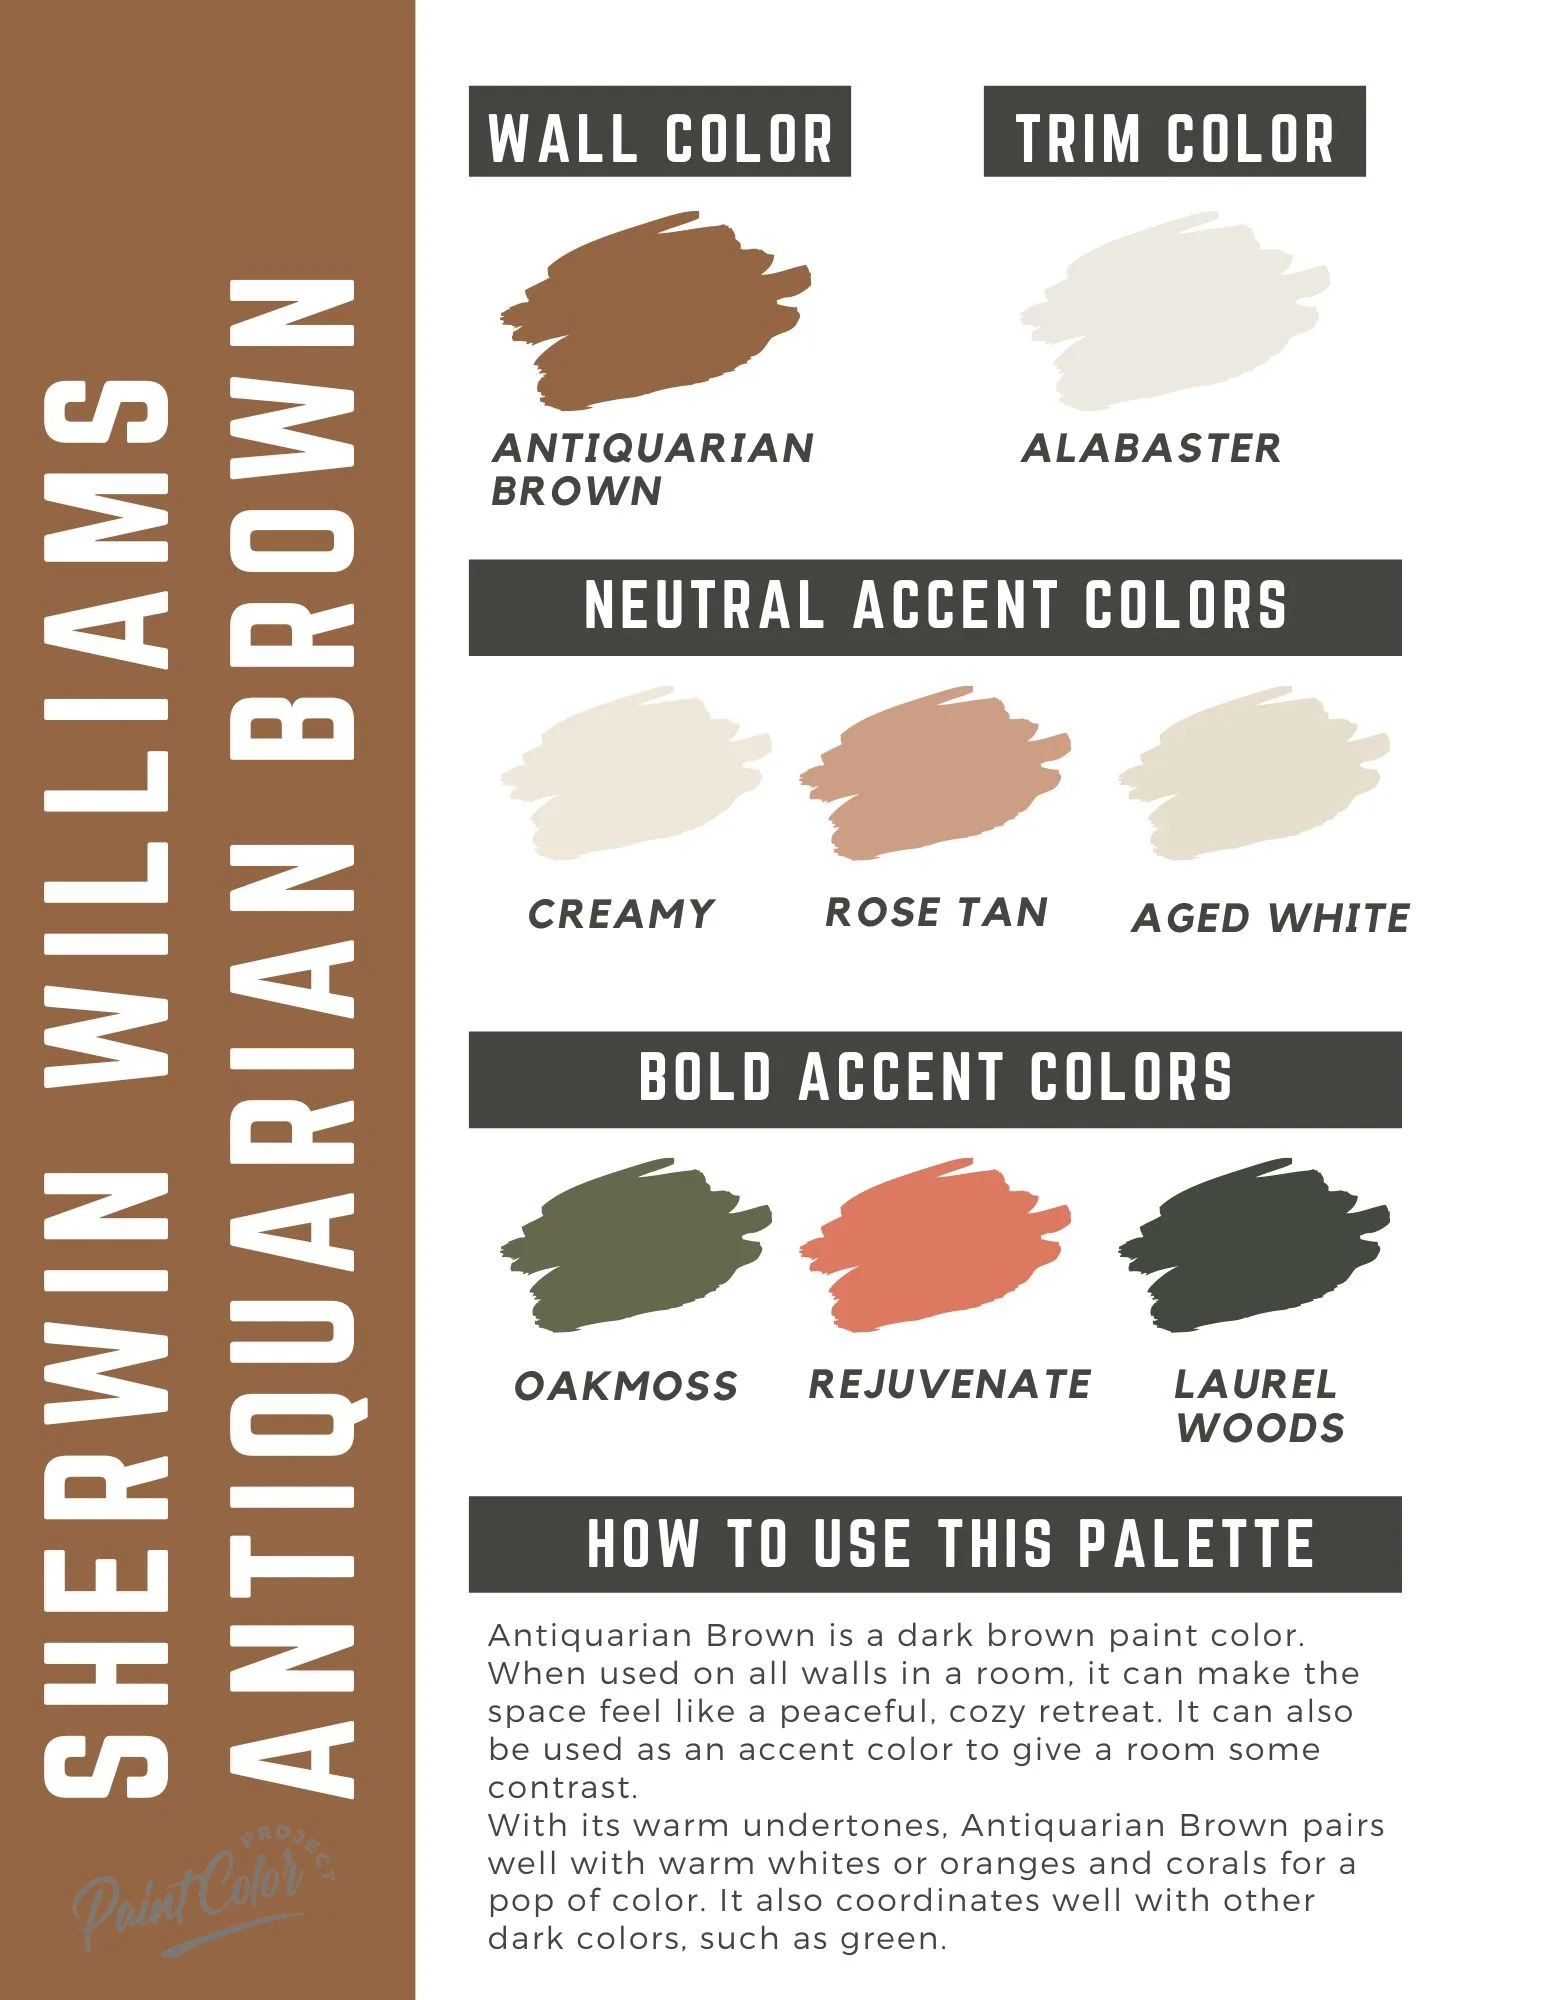 Sherwin Williams Antiquarian Brown paint color palette